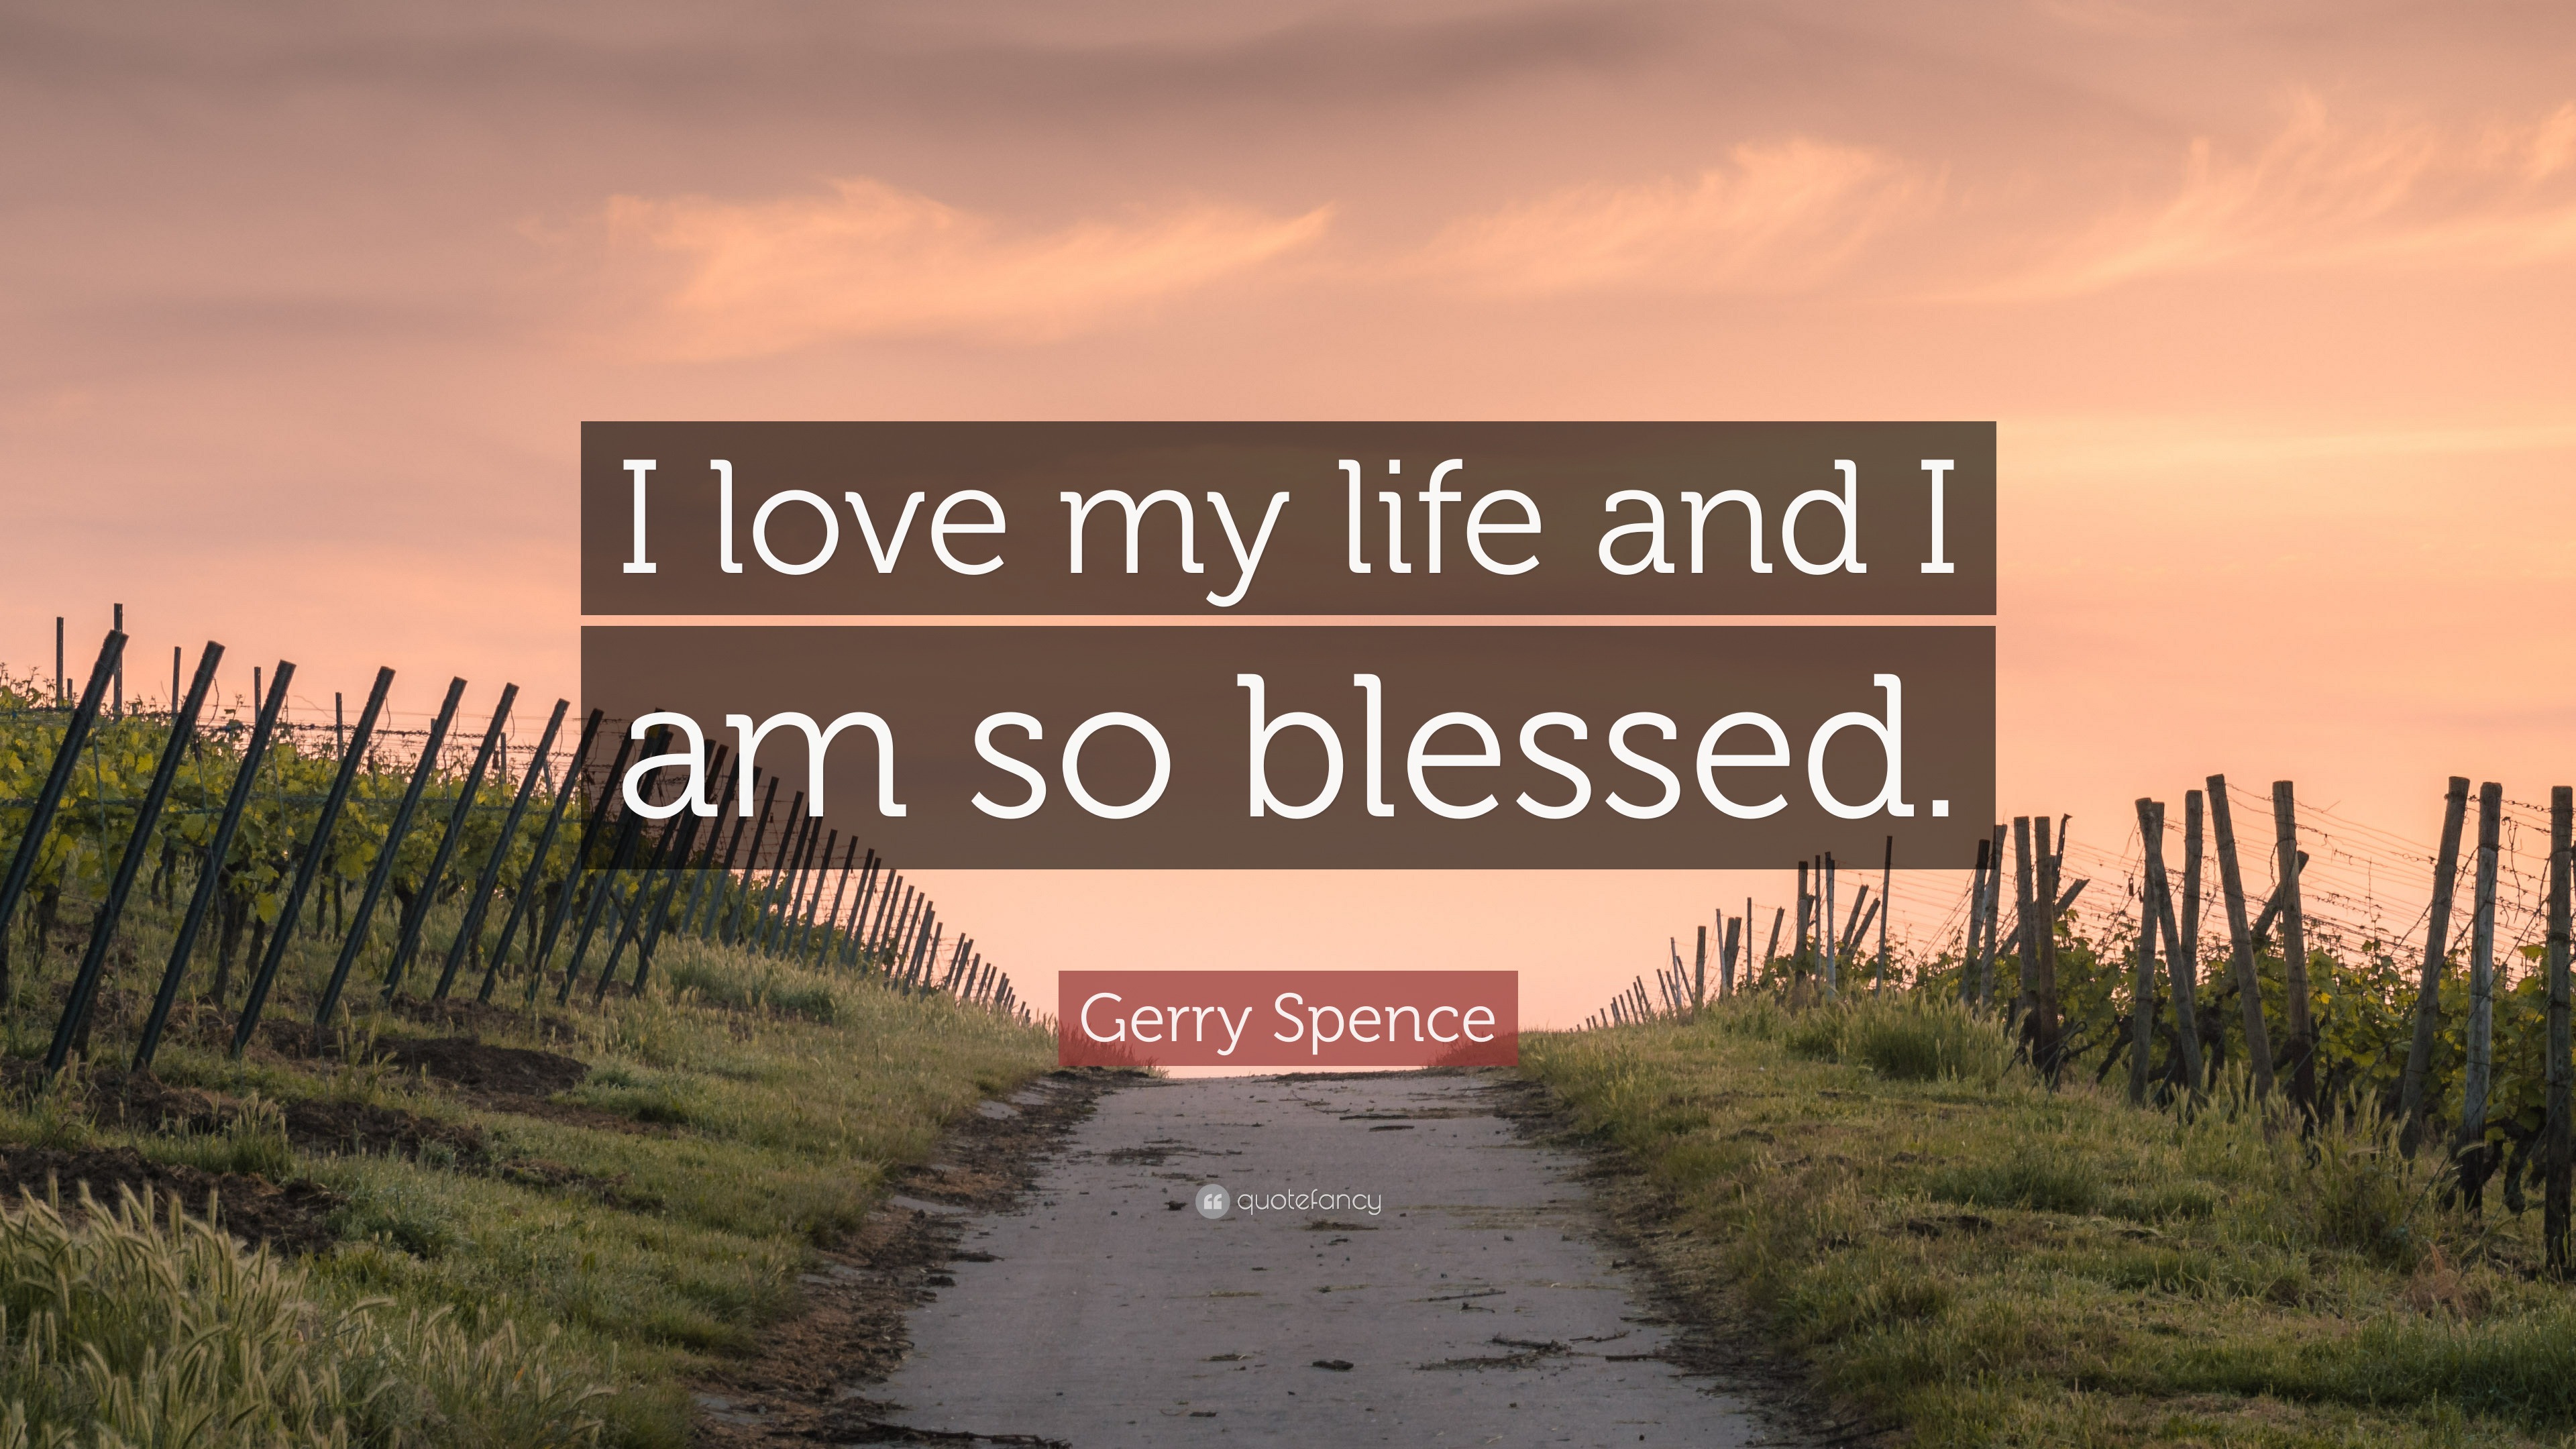 Gerry Spence Quote I Love My Life And I Am So Blessed 9 Wallpapers Quotefancy